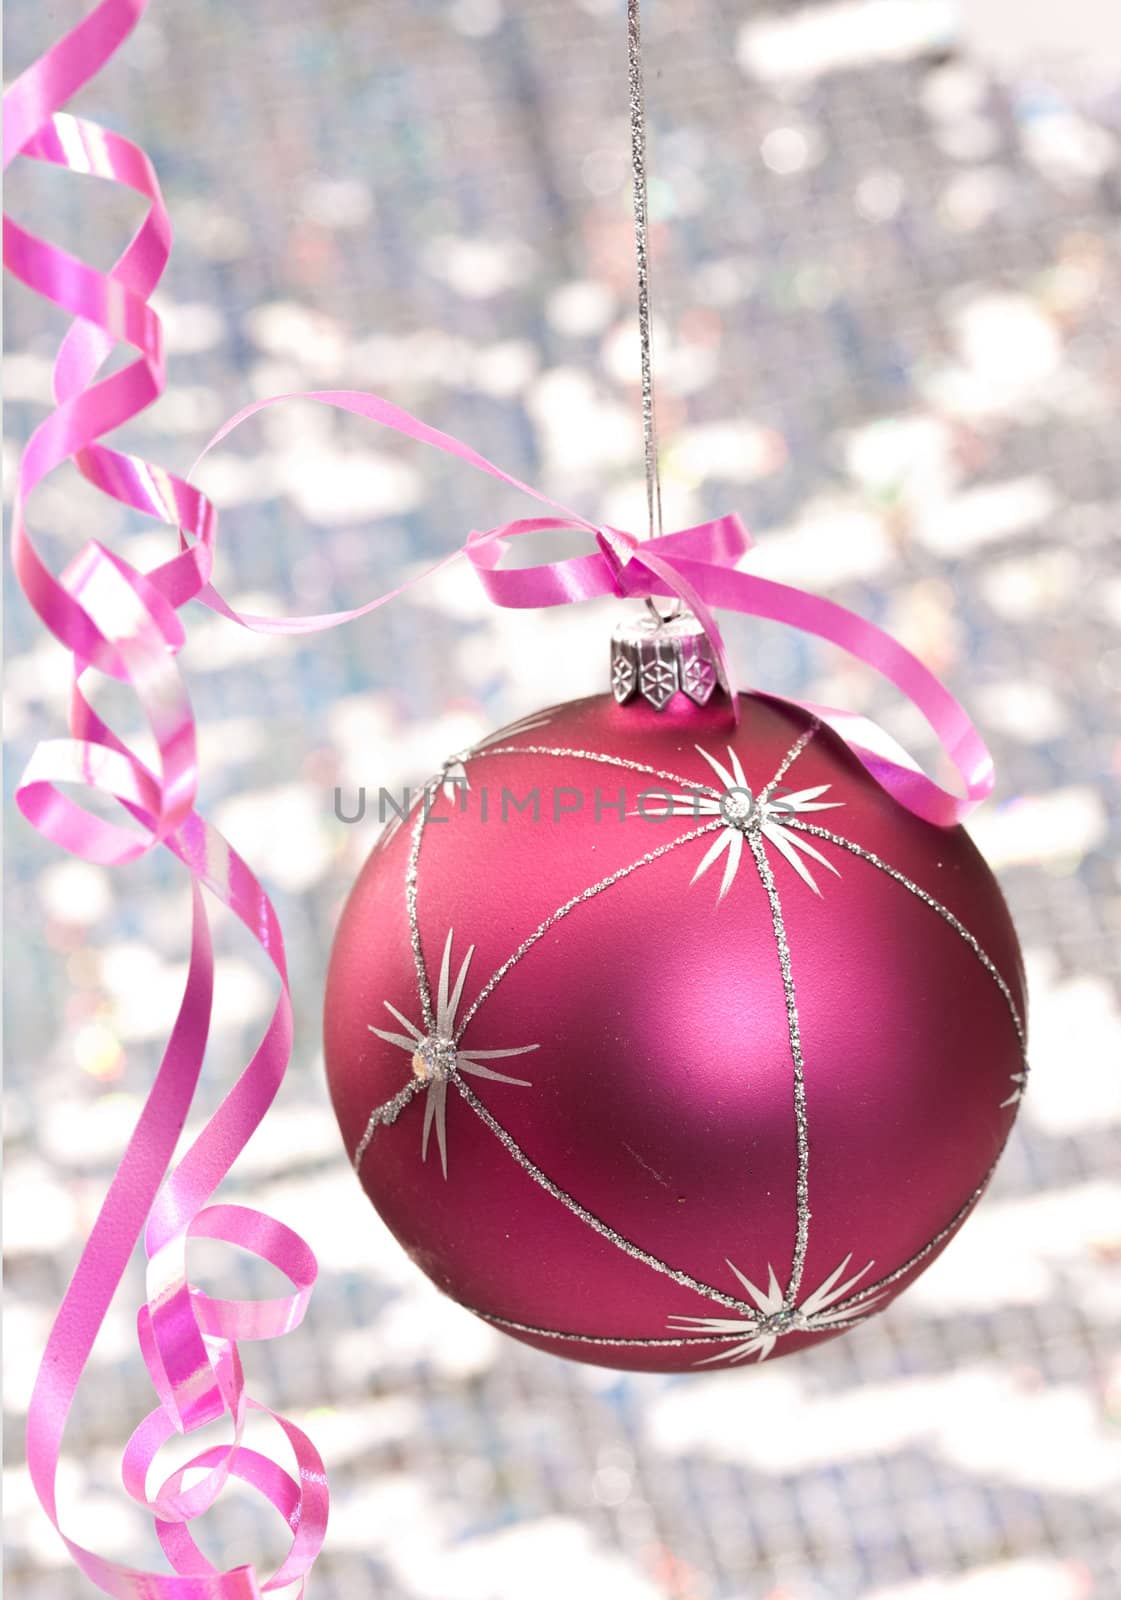 holiday series: christmas pink ball decoration with background